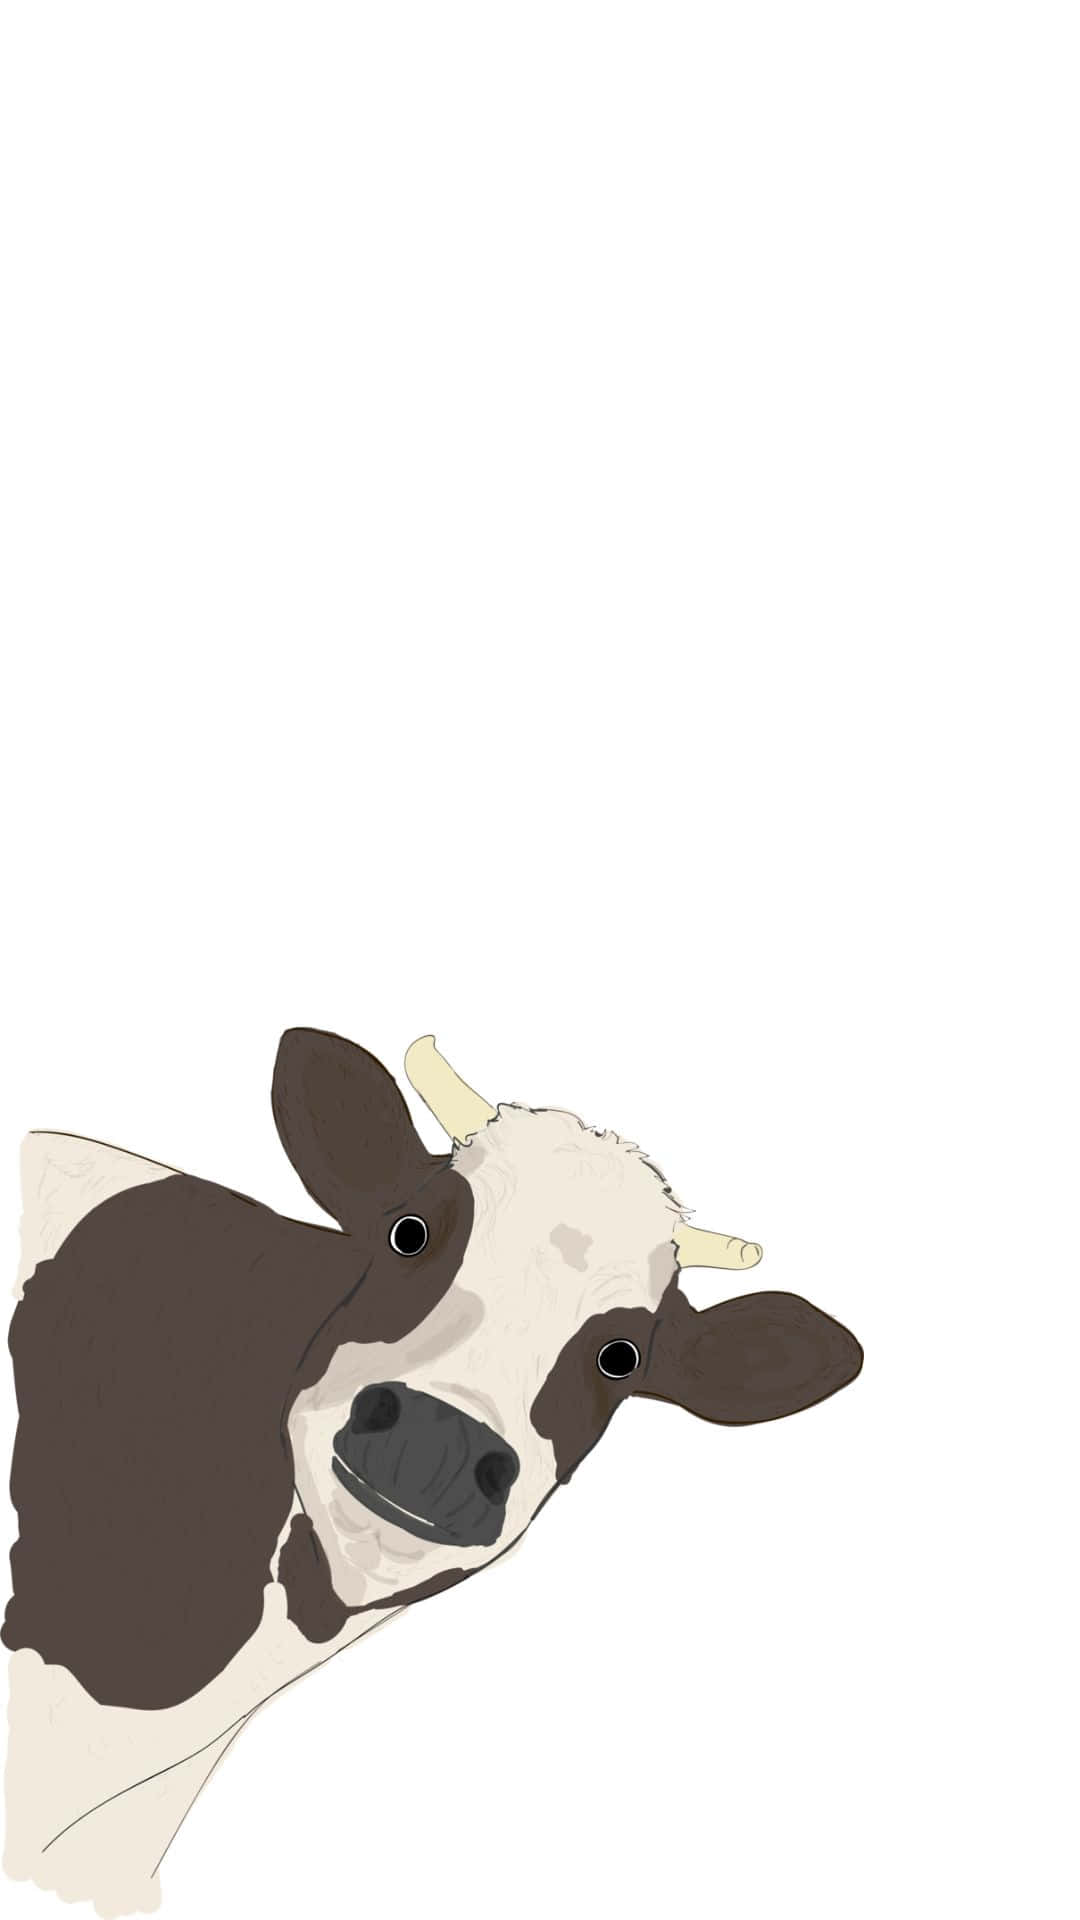 A Cow Is Looking Up